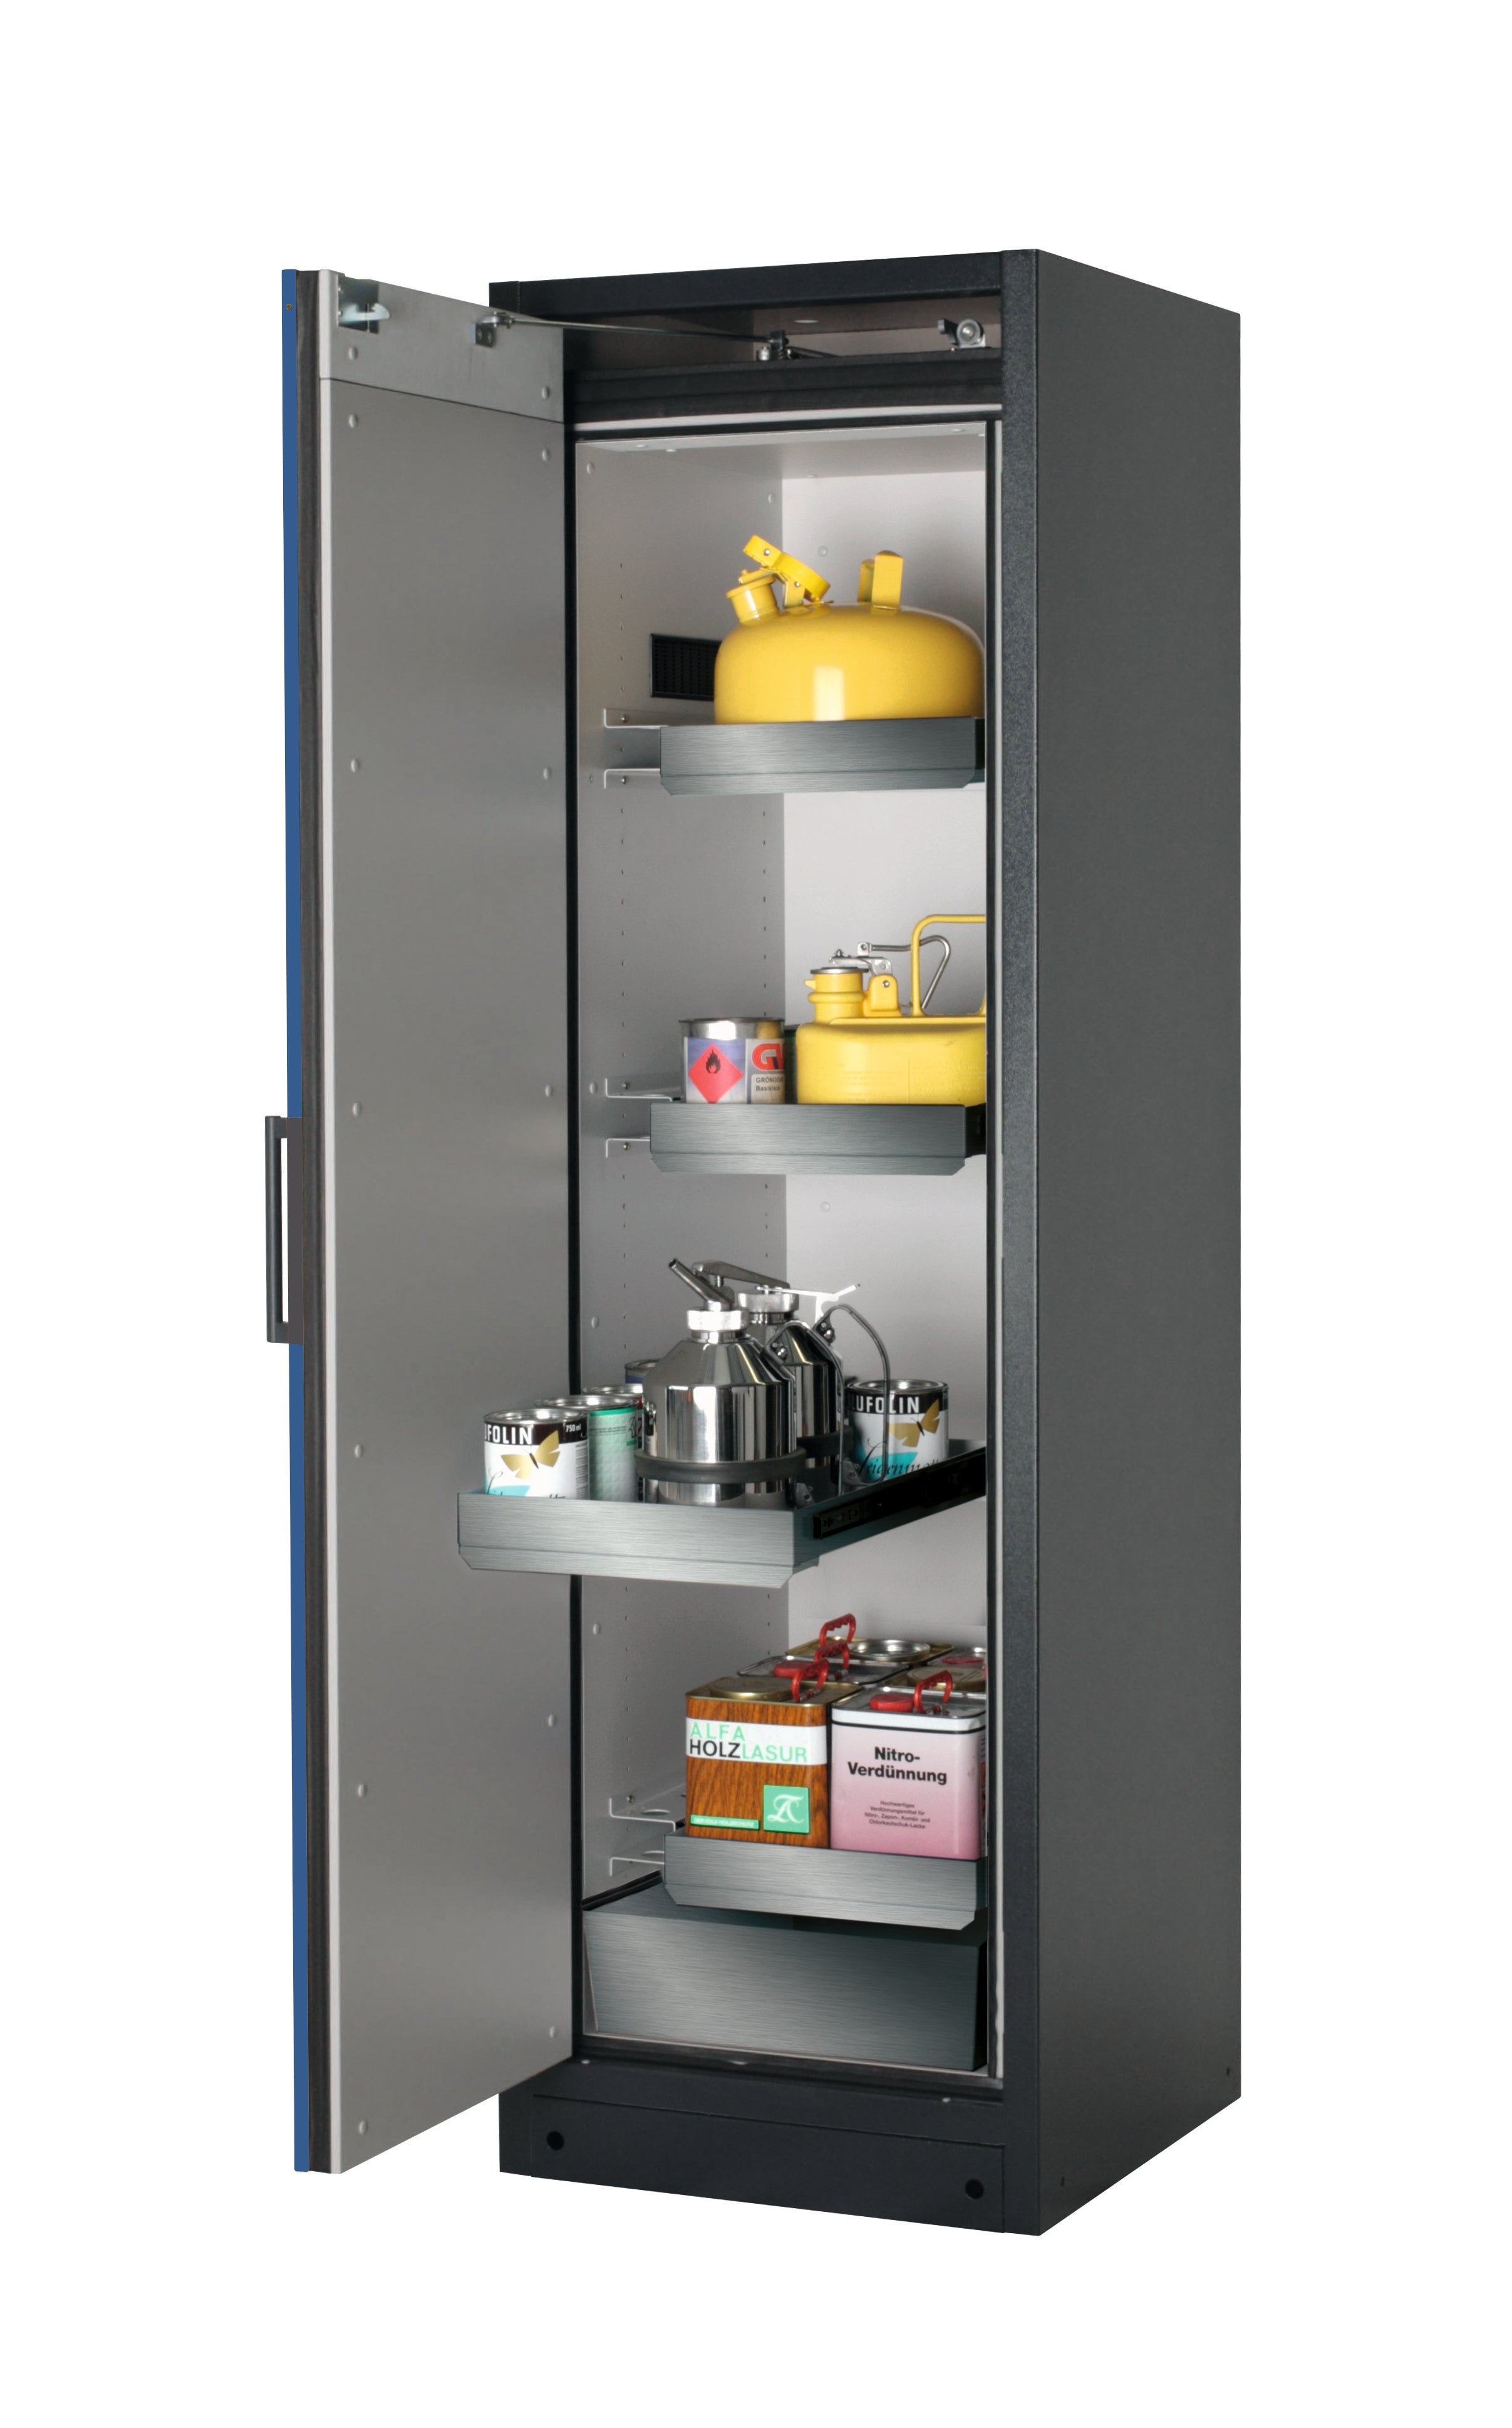 Type 90 safety storage cabinet Q-CLASSIC-90 model Q90.195.060 in gentian blue RAL 5010 with 3x drawer (standard) (stainless steel 1.4301),